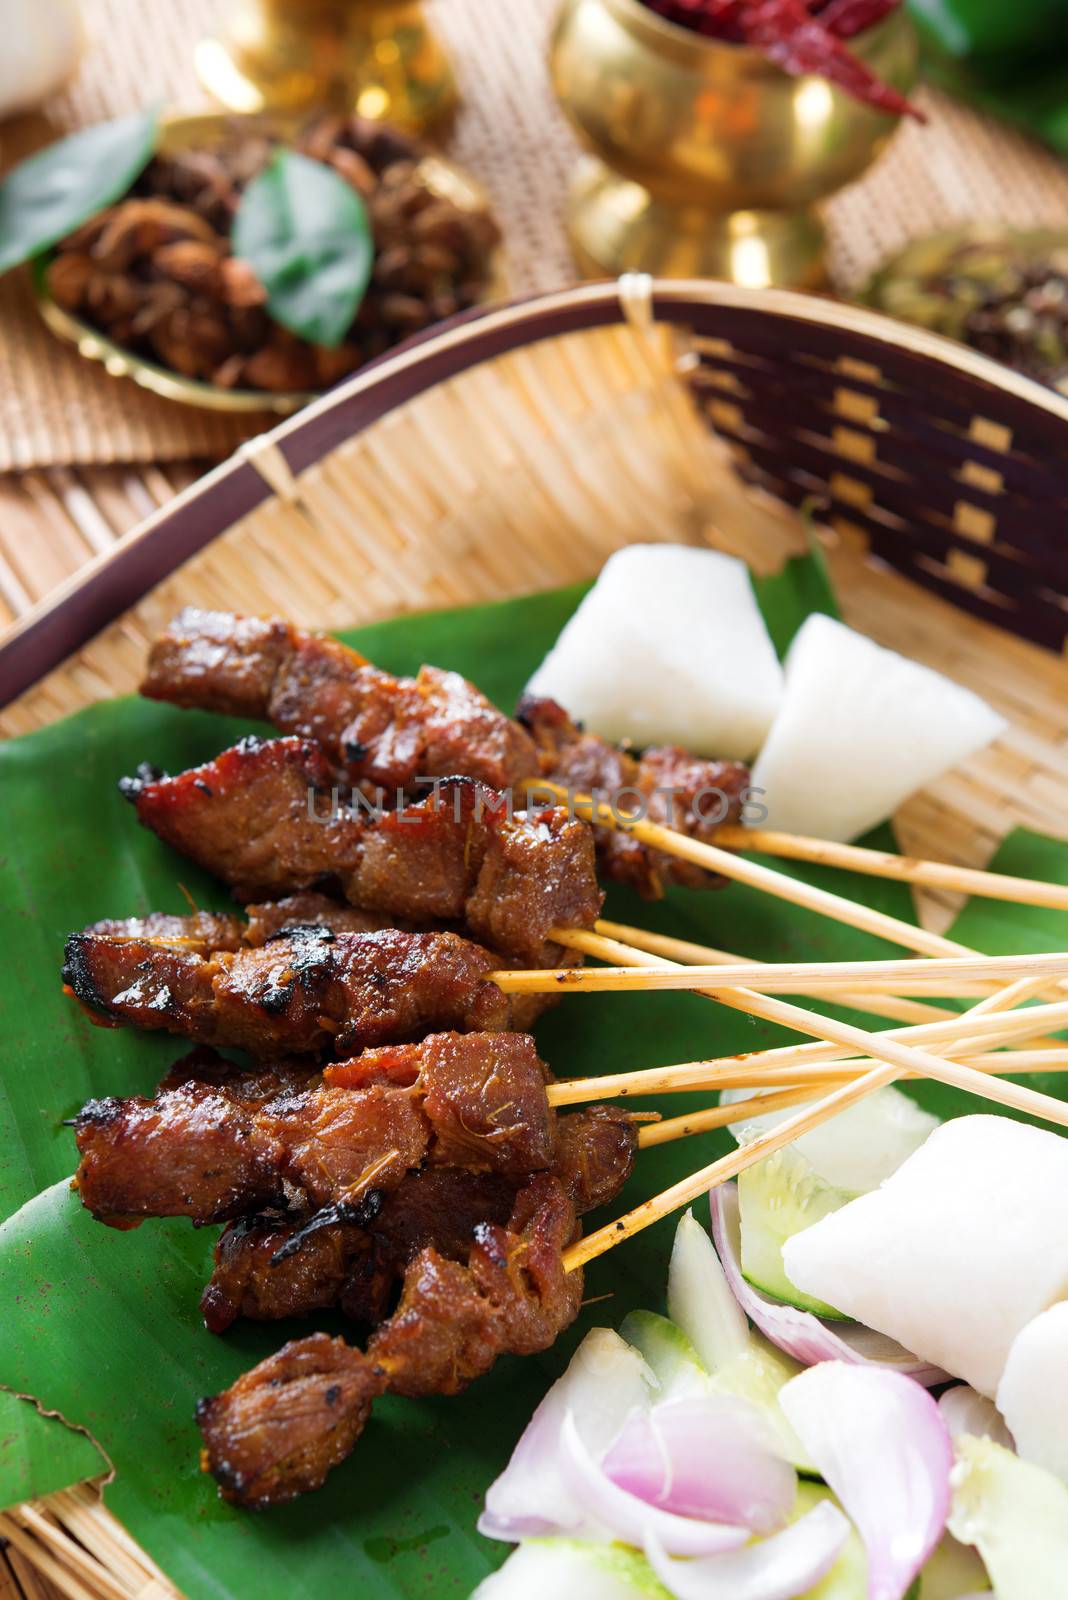 Beef satay, roasted meat skewer Malay food. Traditional Singapore food. Hot and spicy Singaporean dish, Asian cuisine.
